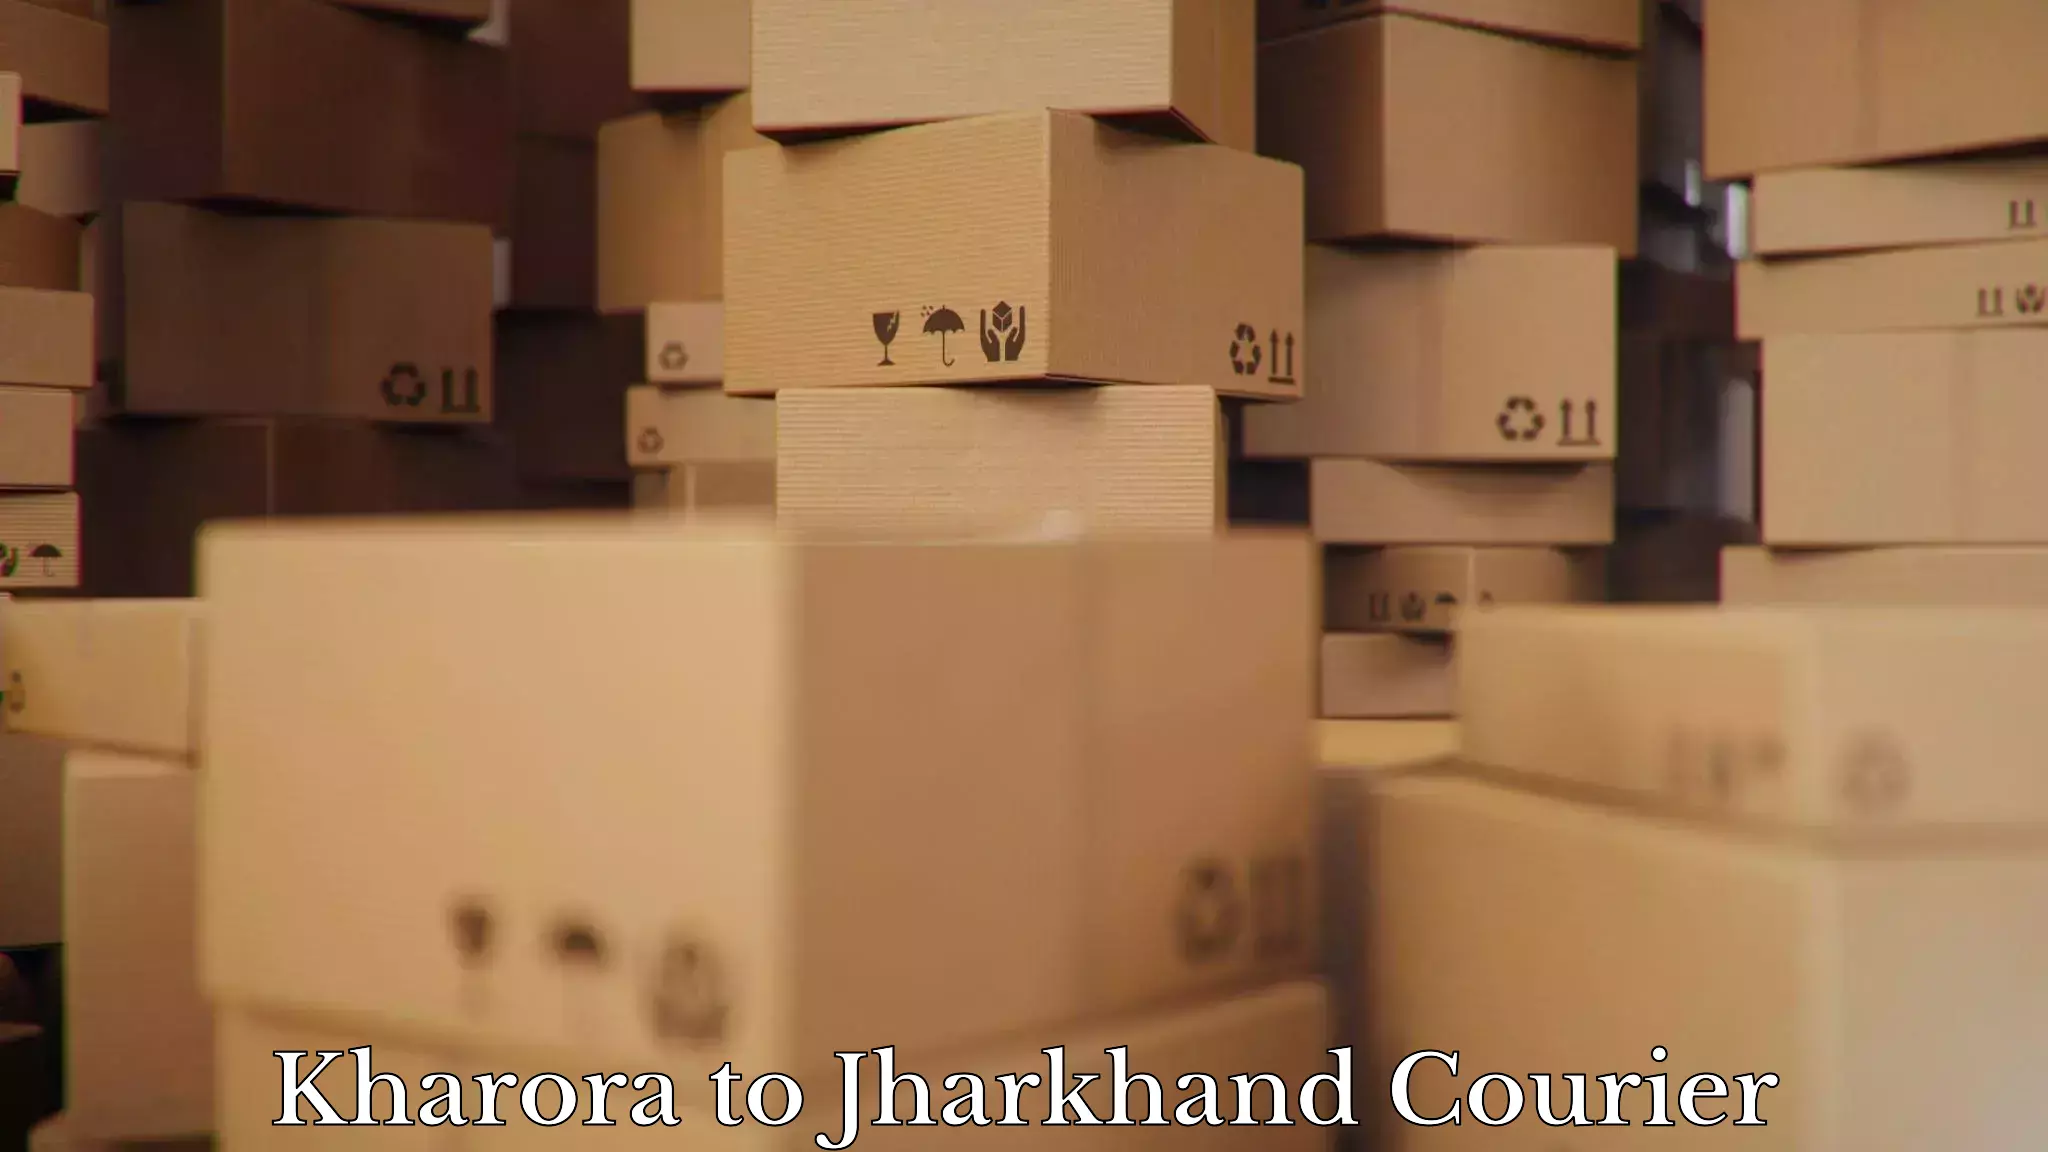 Trusted relocation experts Kharora to Jharkhand